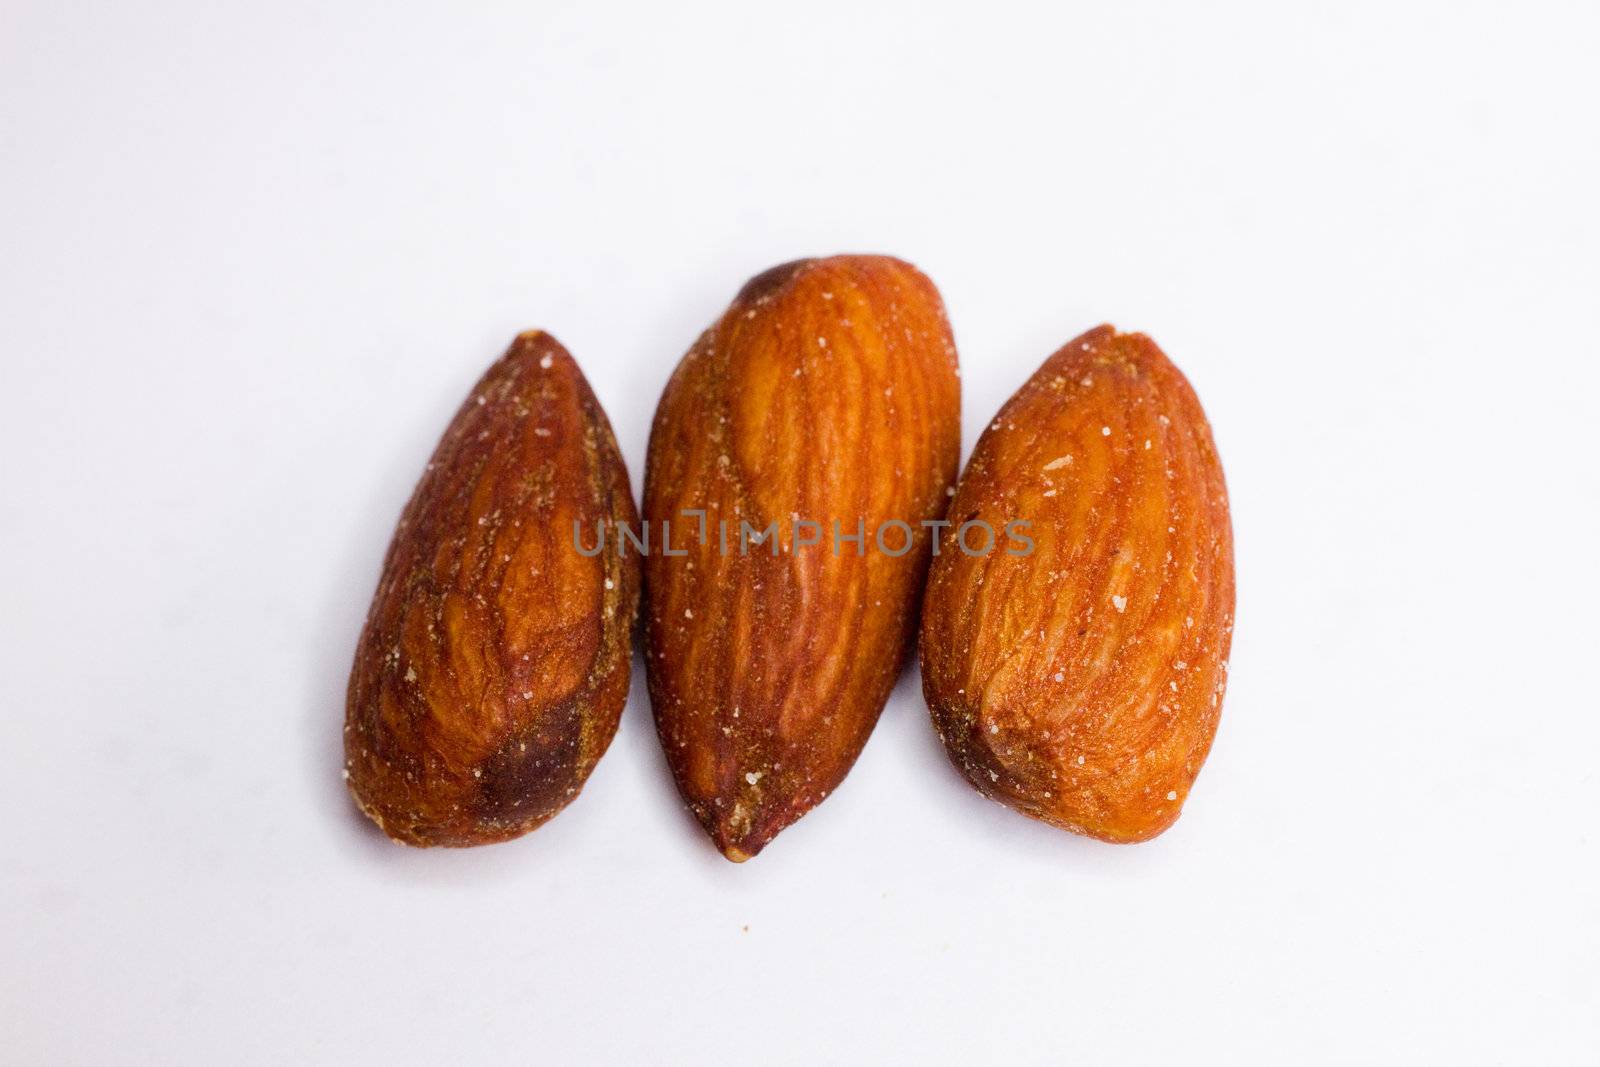 Salted Almonds by photopro